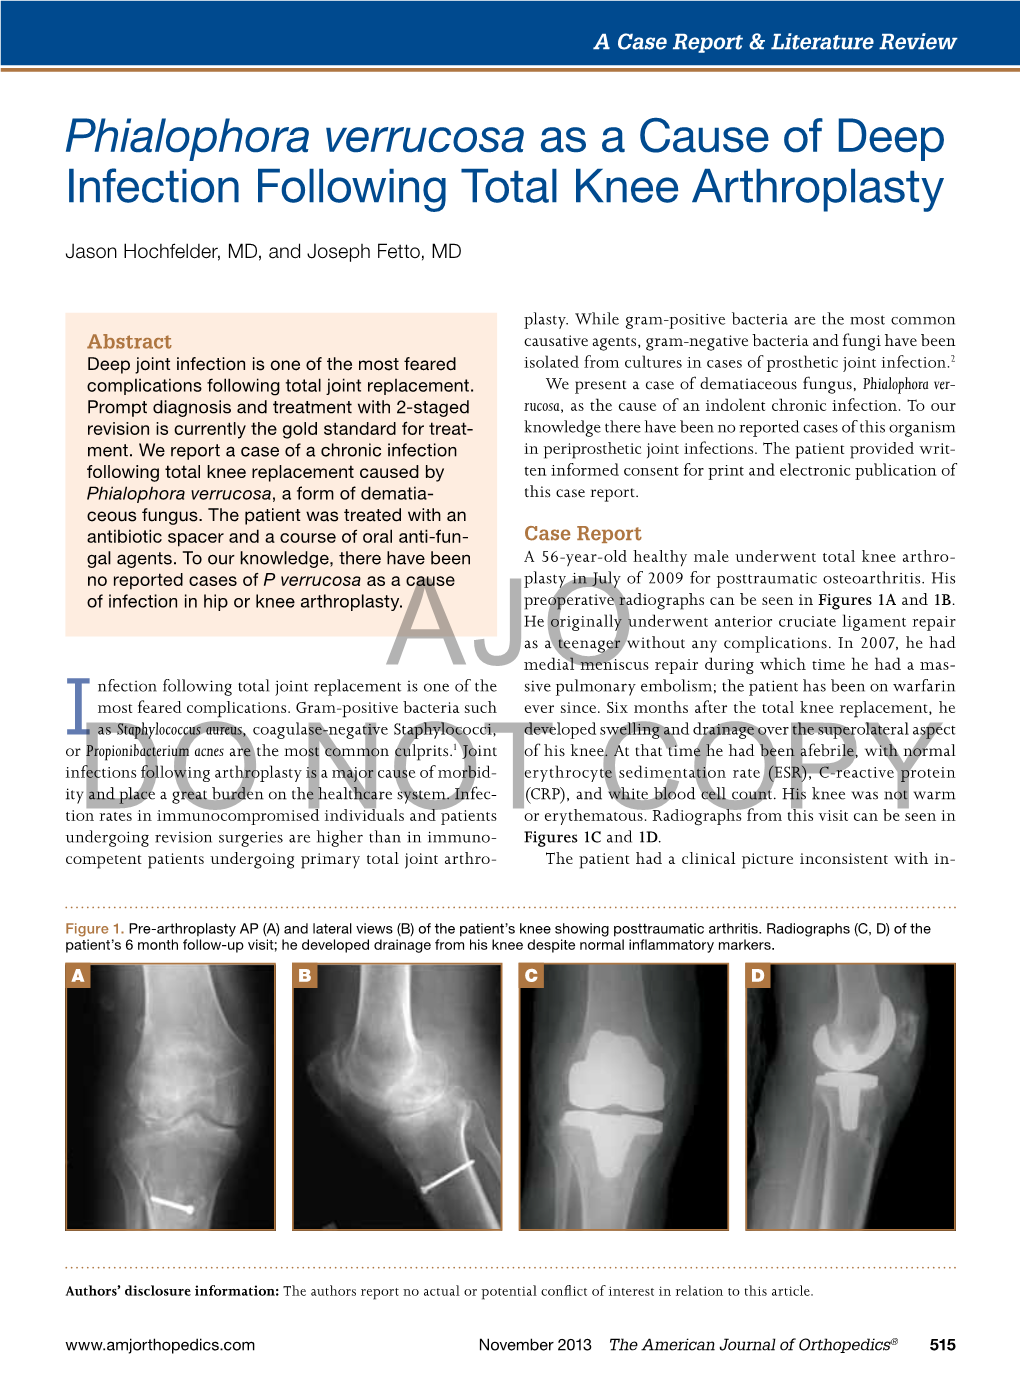 Phialophora Verrucosa As a Cause of Deep Infection Following Total Knee Arthroplasty